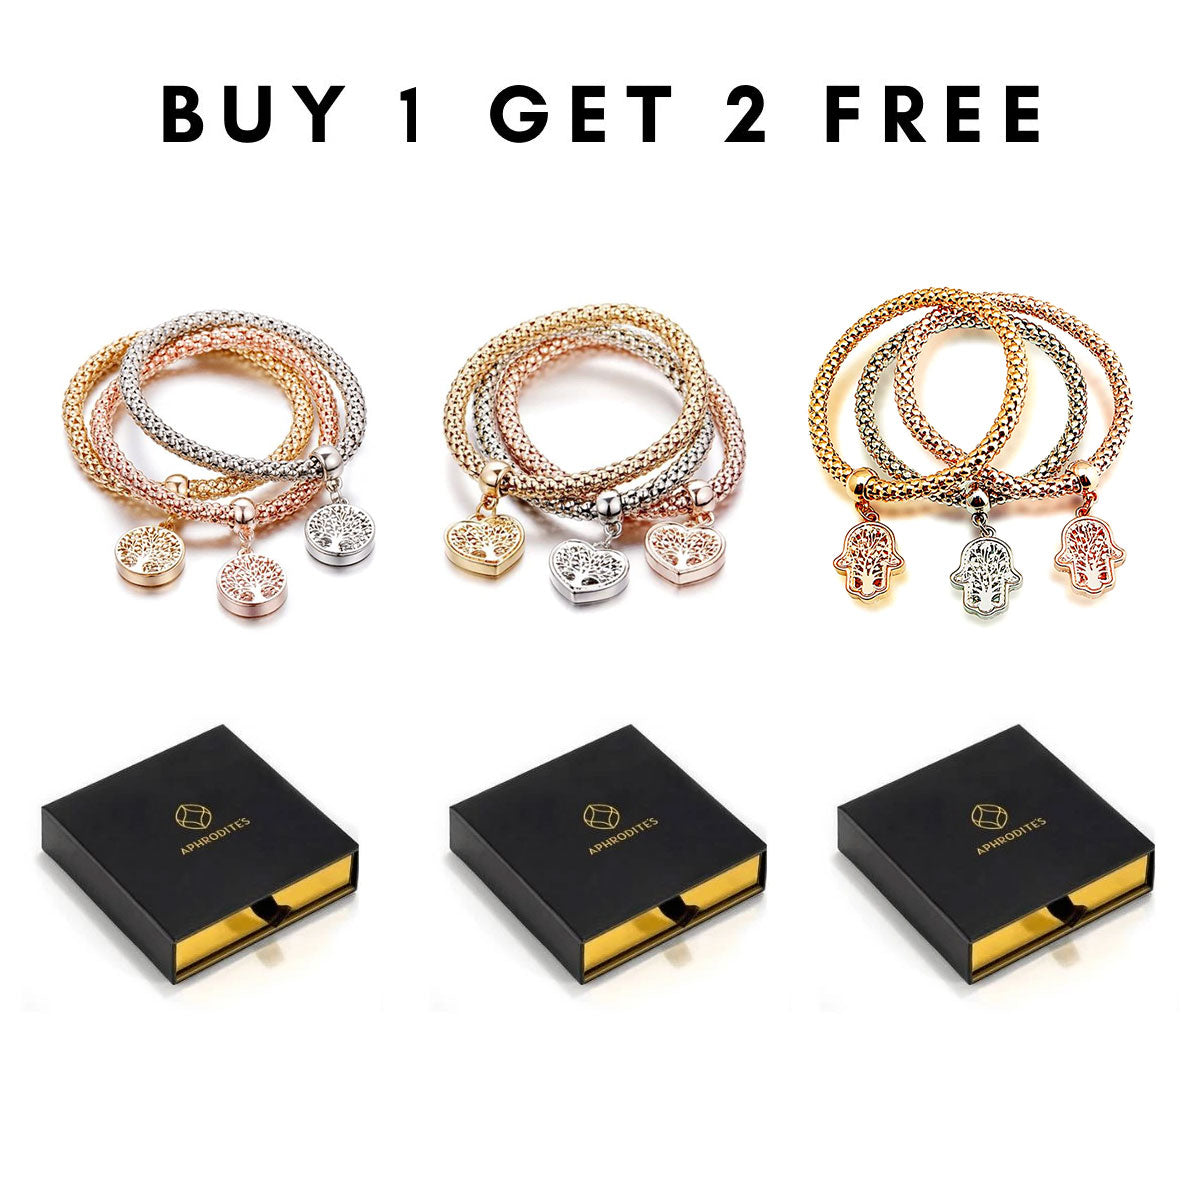 BUY 1 GET 2 FREE Glam Trio of Connection